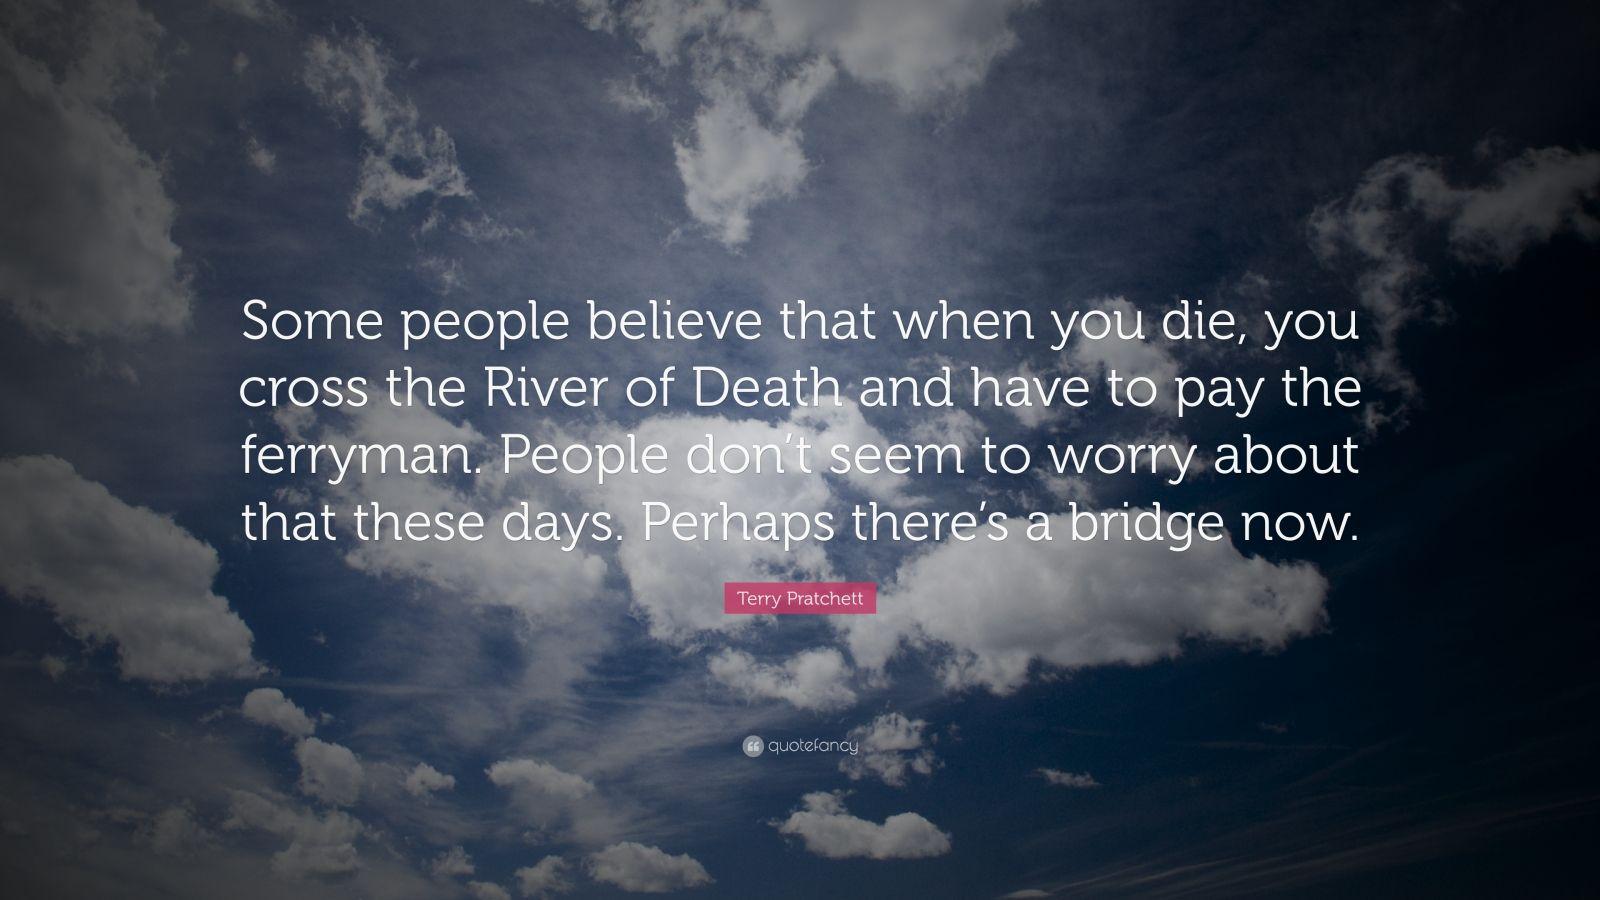 Terry Pratchett Quote: “Some people believe that when you